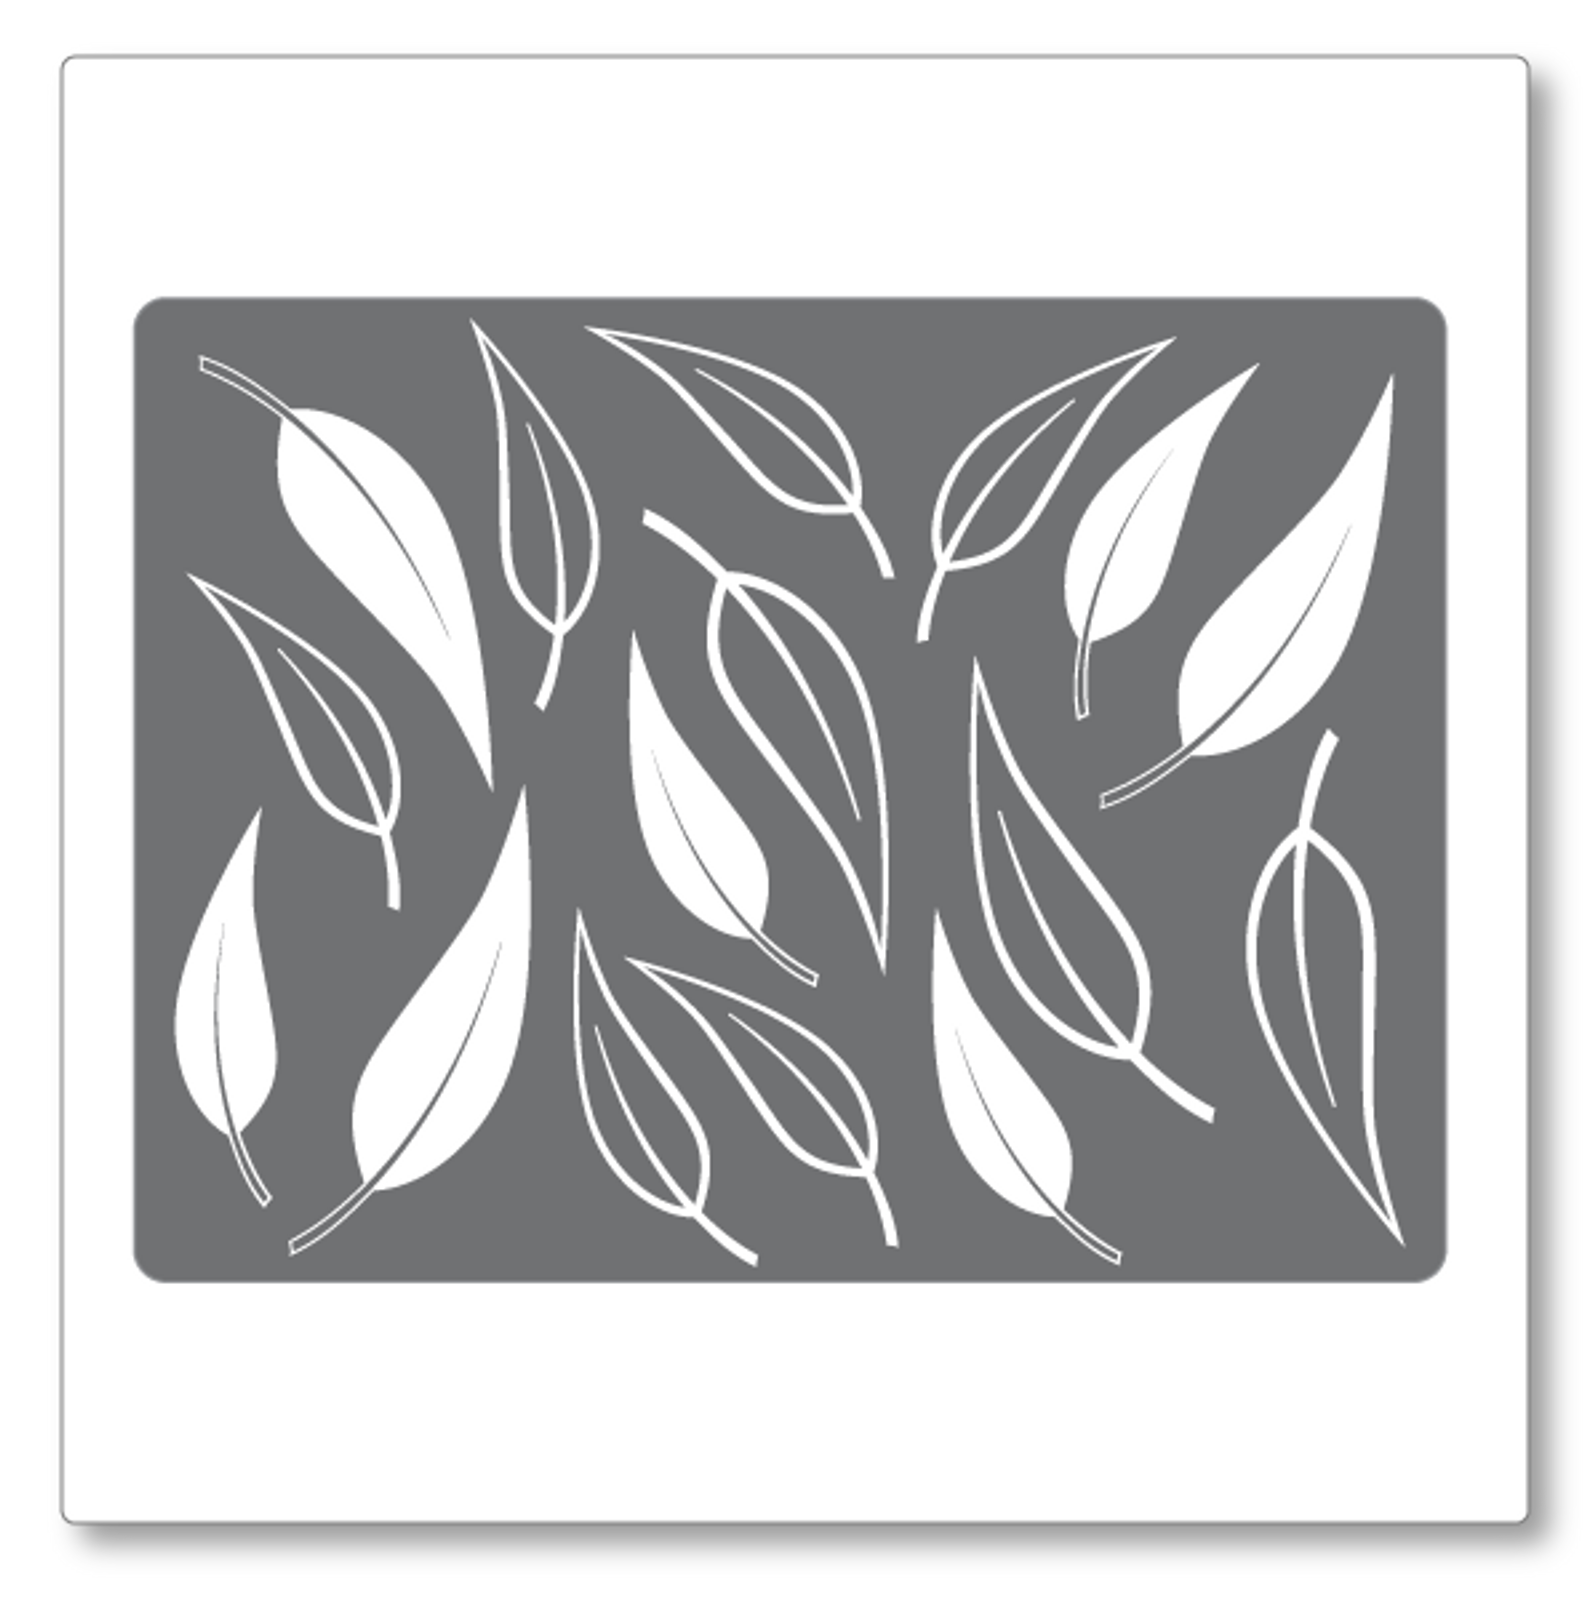 Gum Tree Leaves (small) wall decal